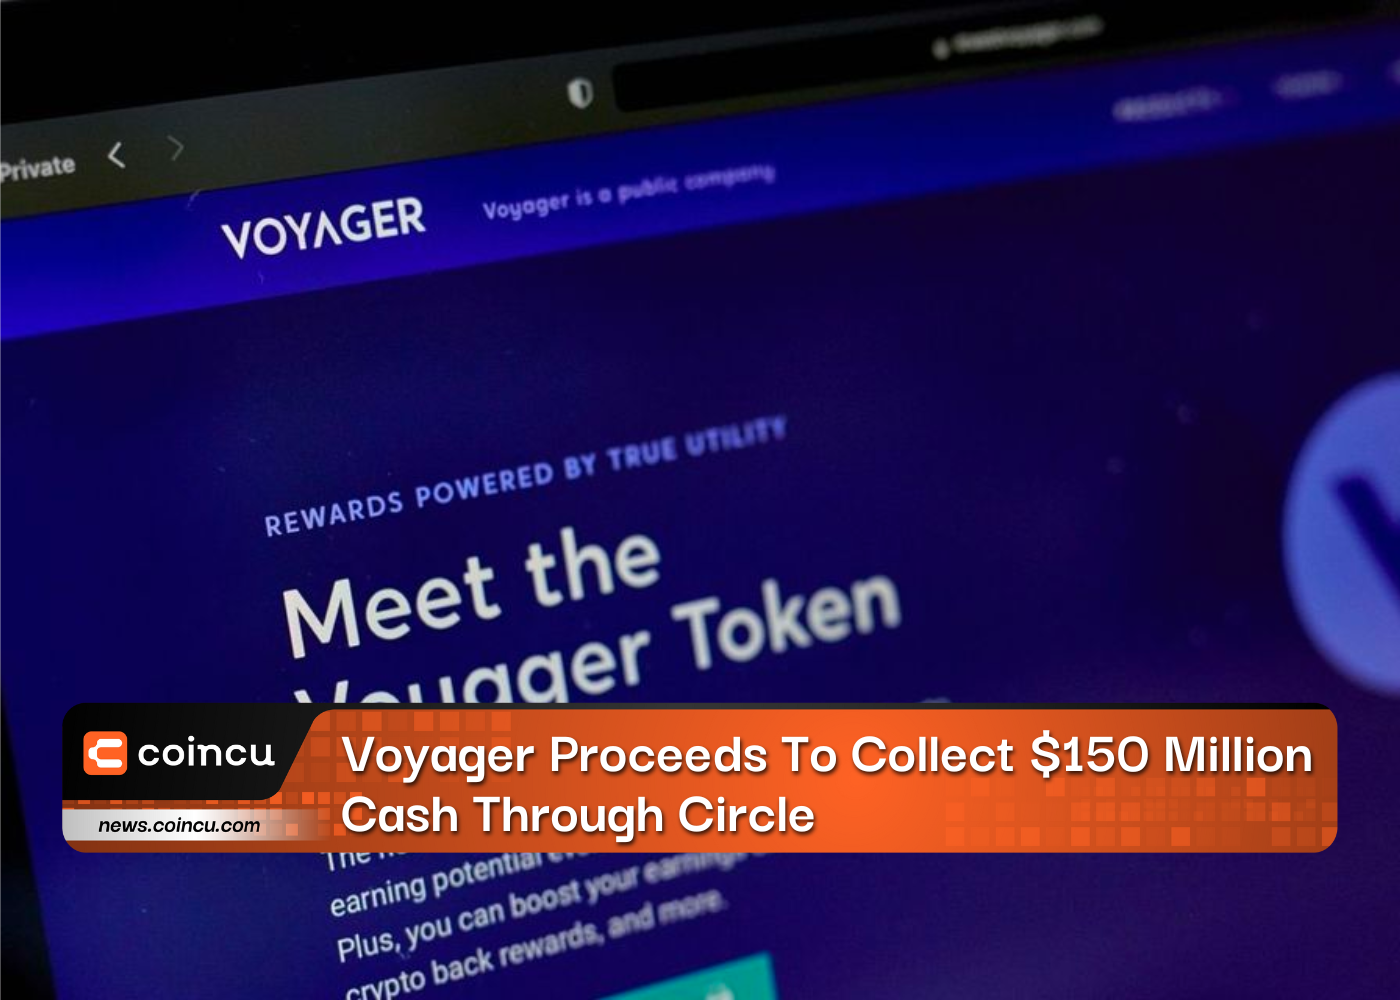 Voyager Proceeds To Collect. $150 Million Cash Through Circle